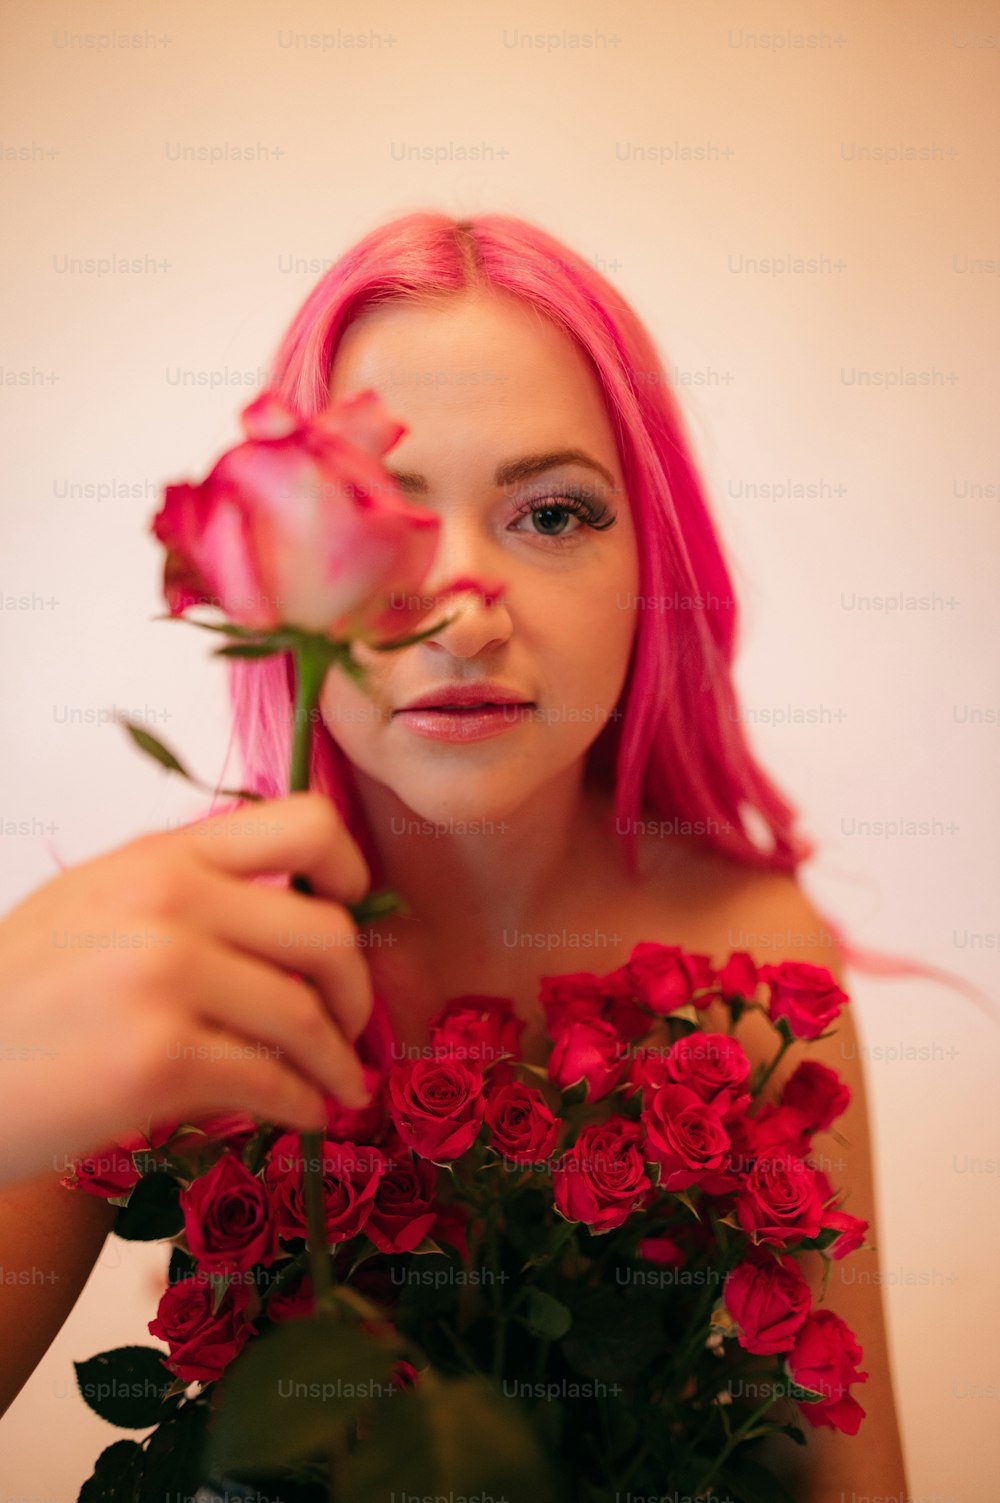 a person holding a rose